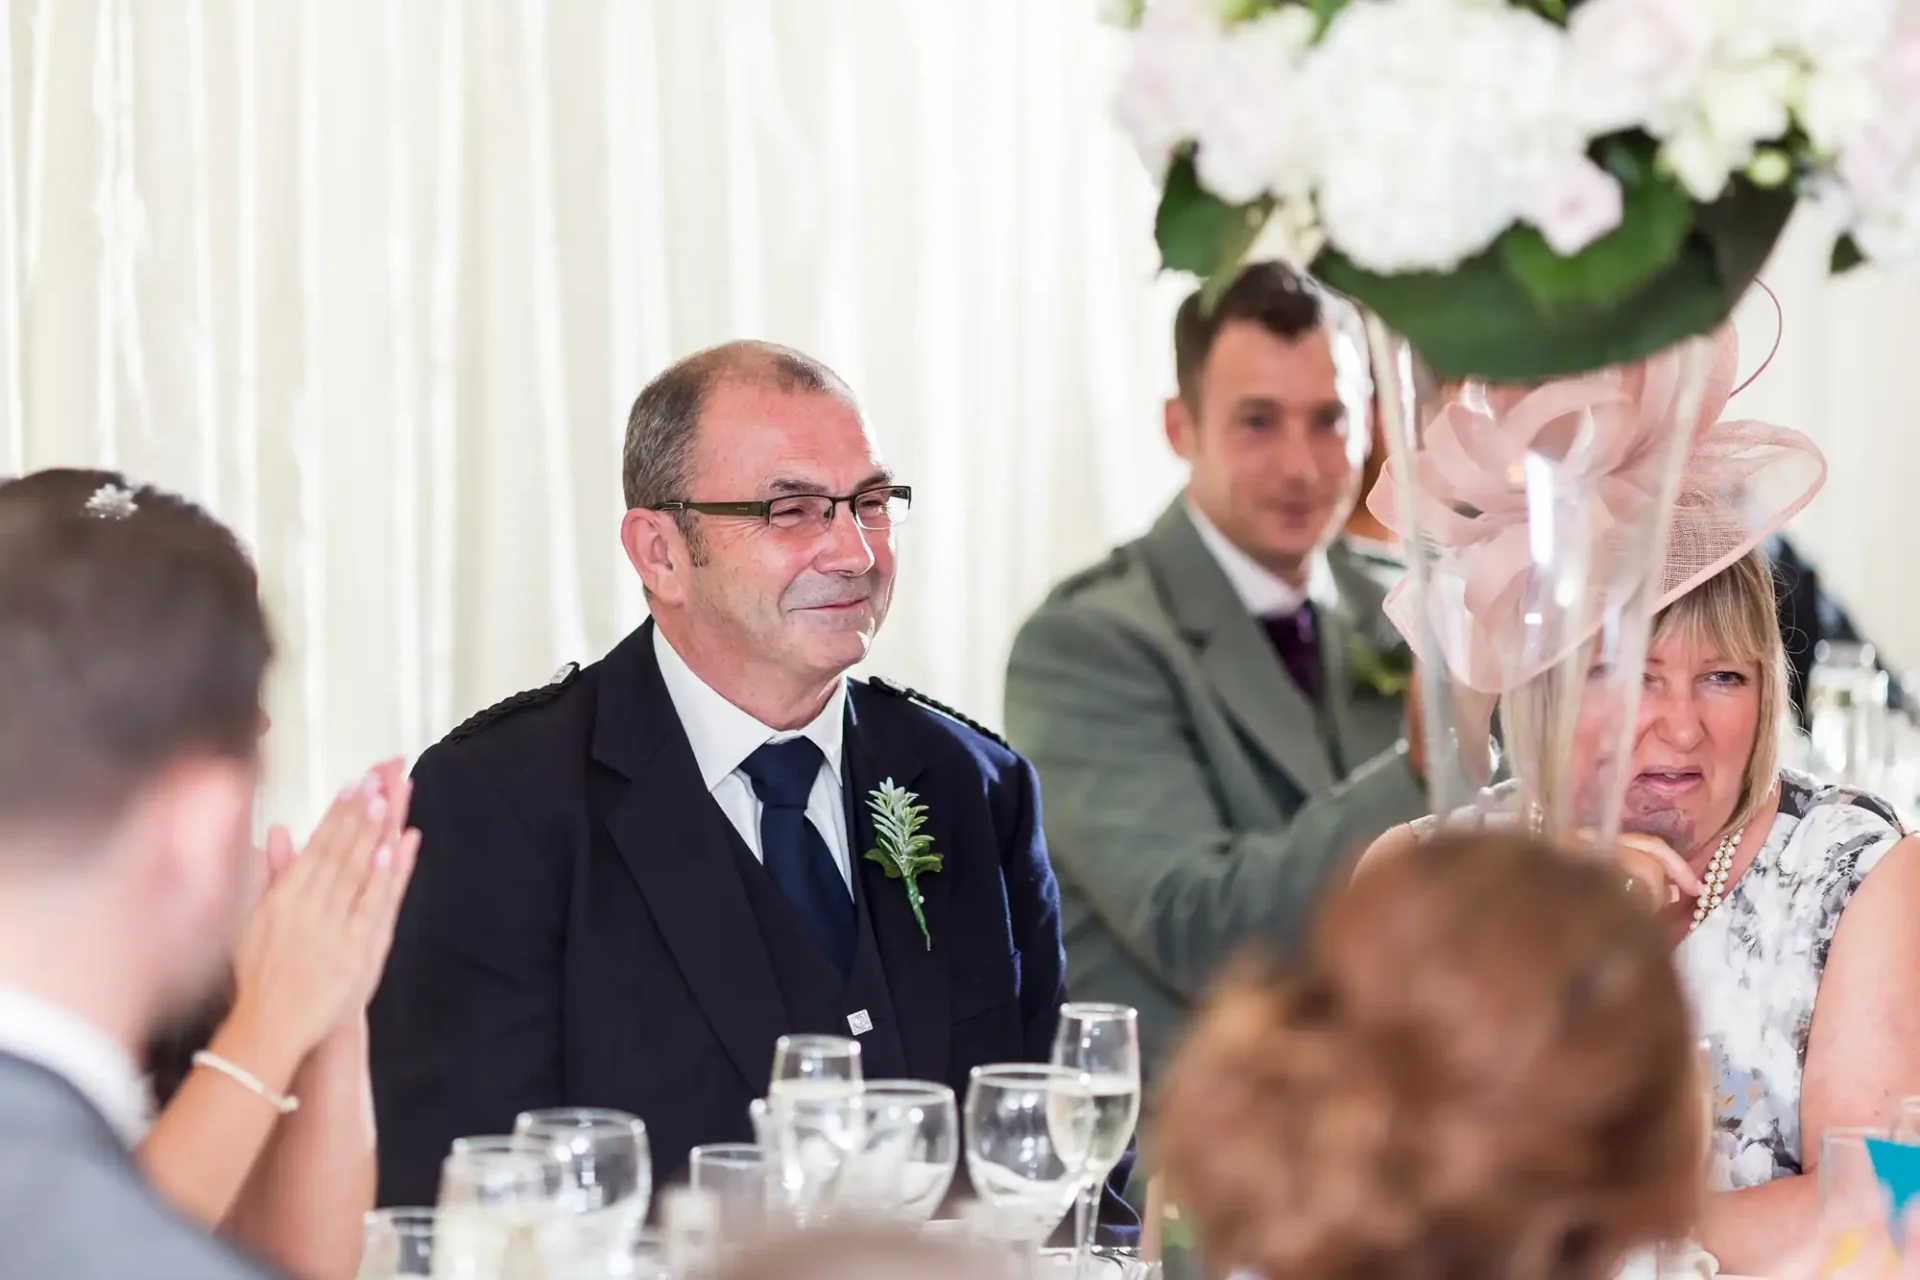 A man in a suit with a boutonniere smiles during a wedding reception, seated at a table with guests and floral decorations.